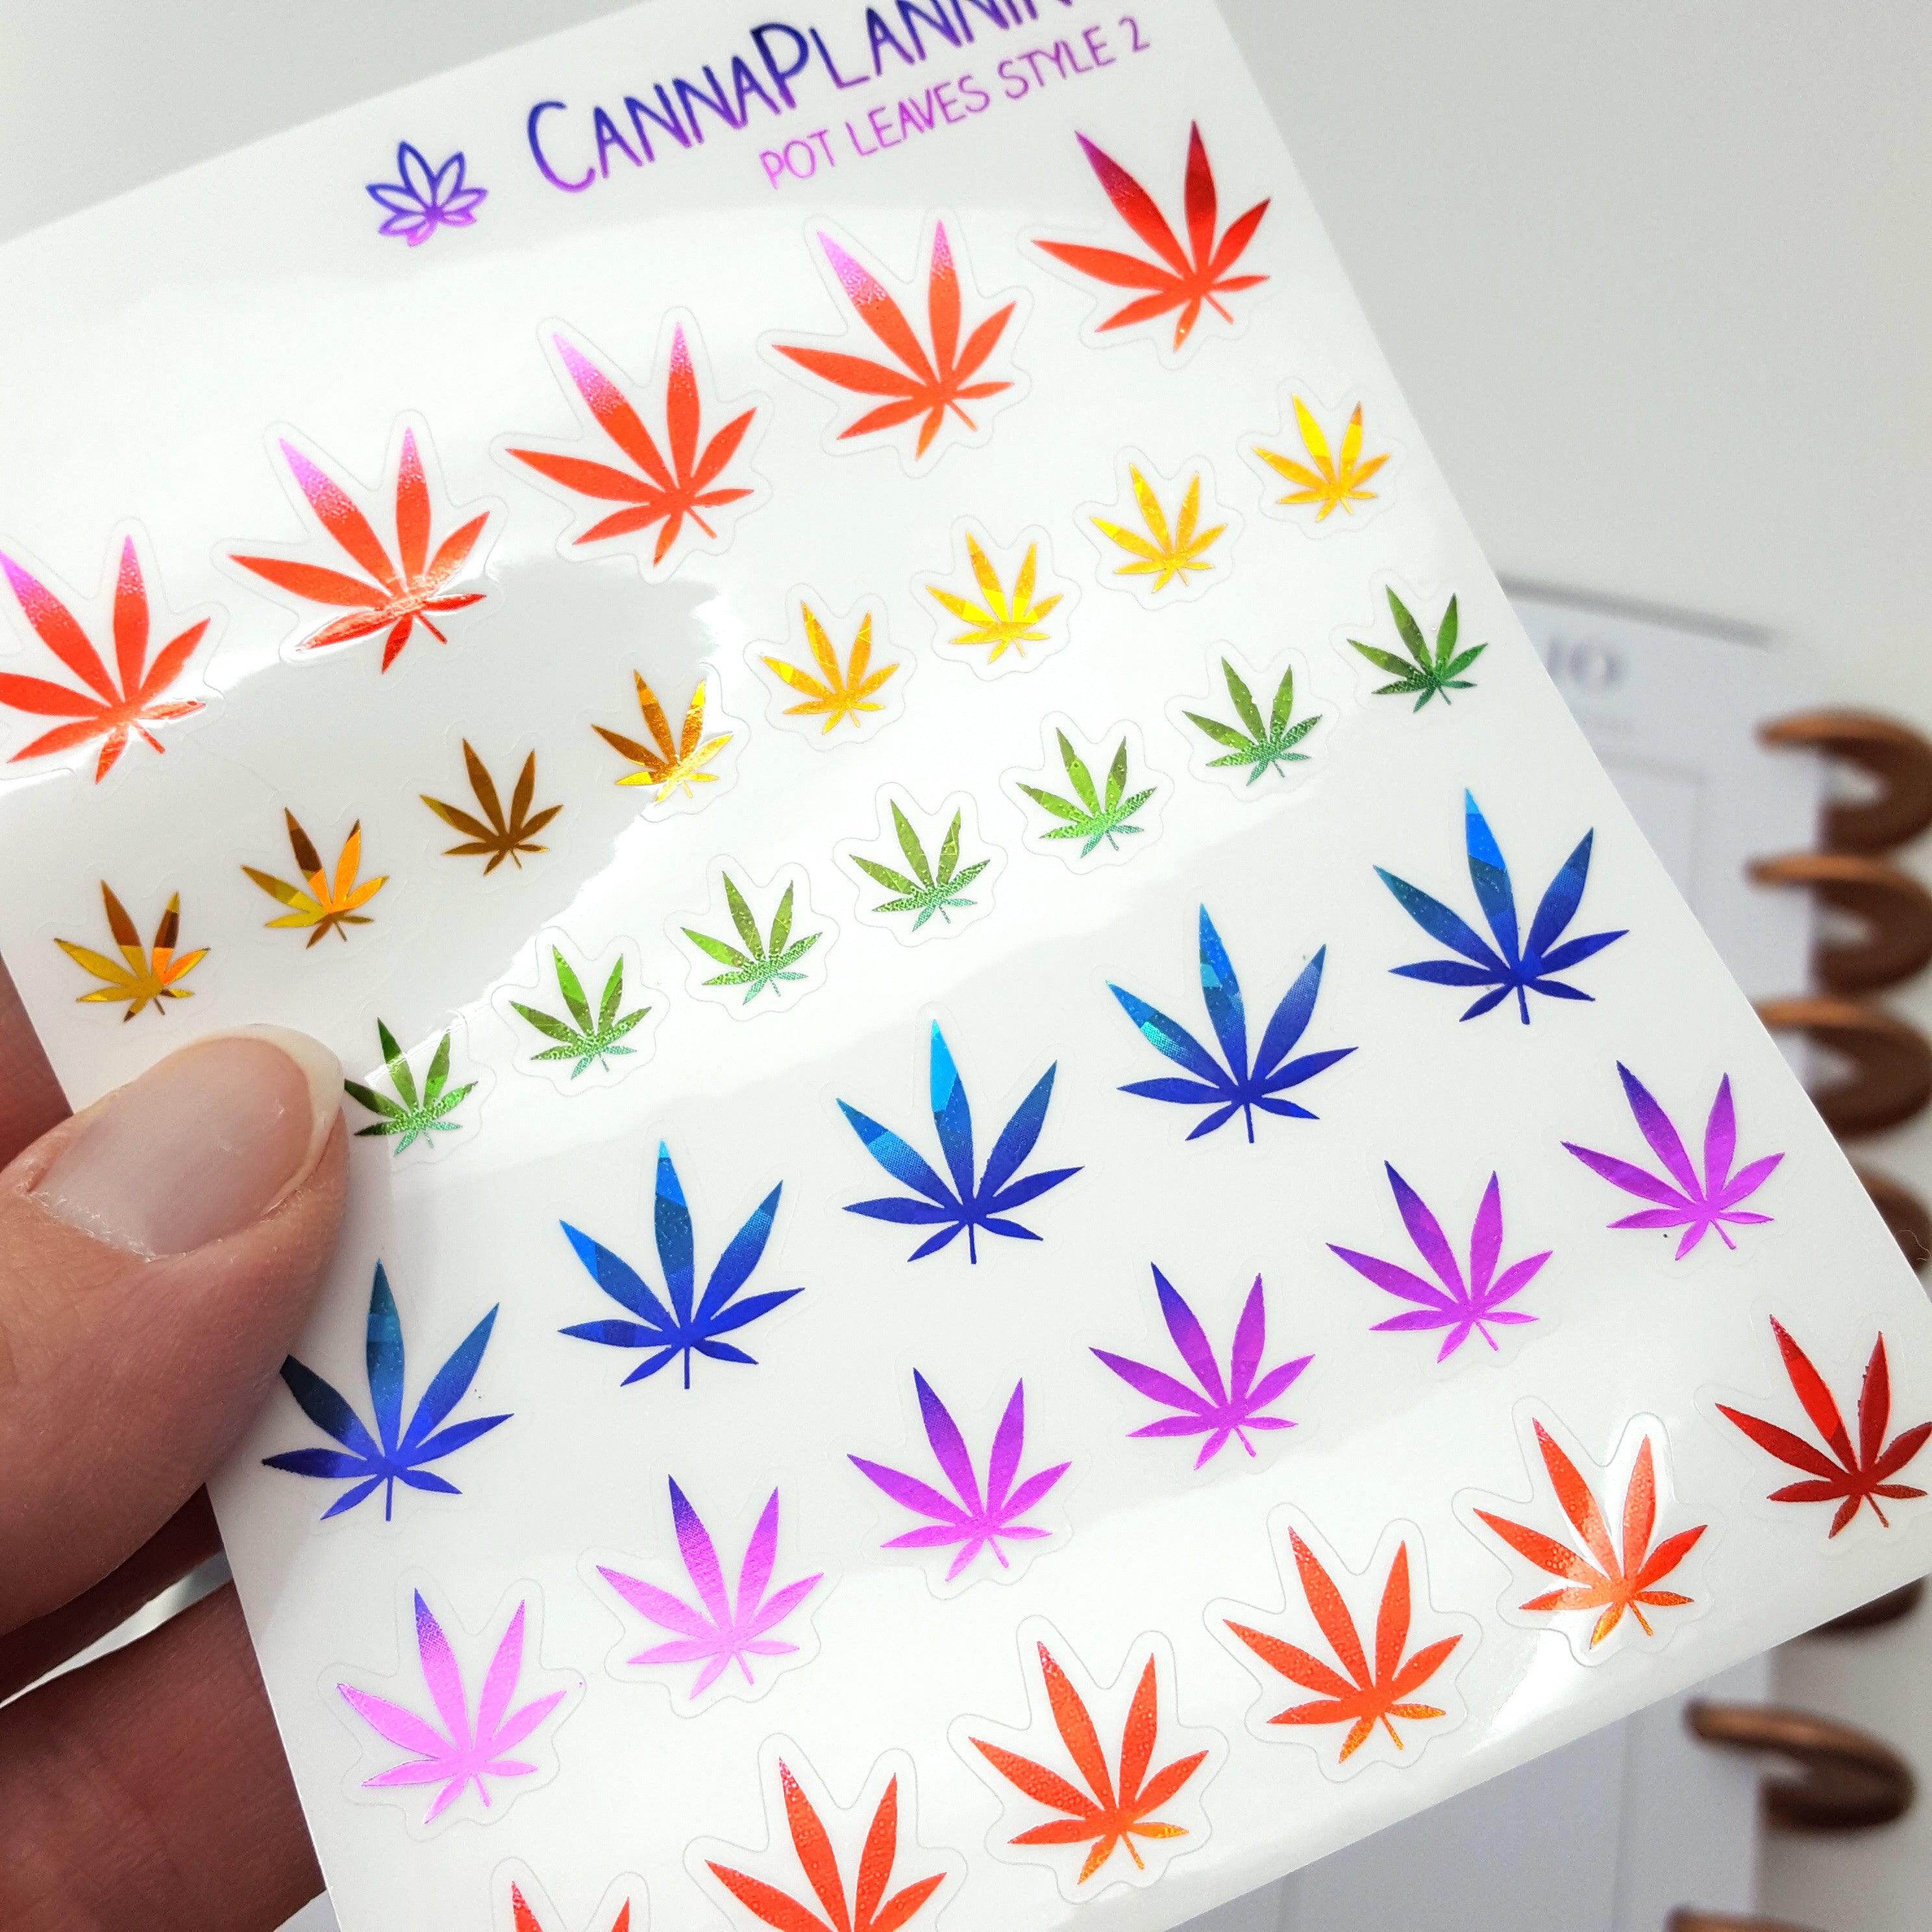 Clear Foiled] Marijuana Valentines Stickers – CannaPlanning